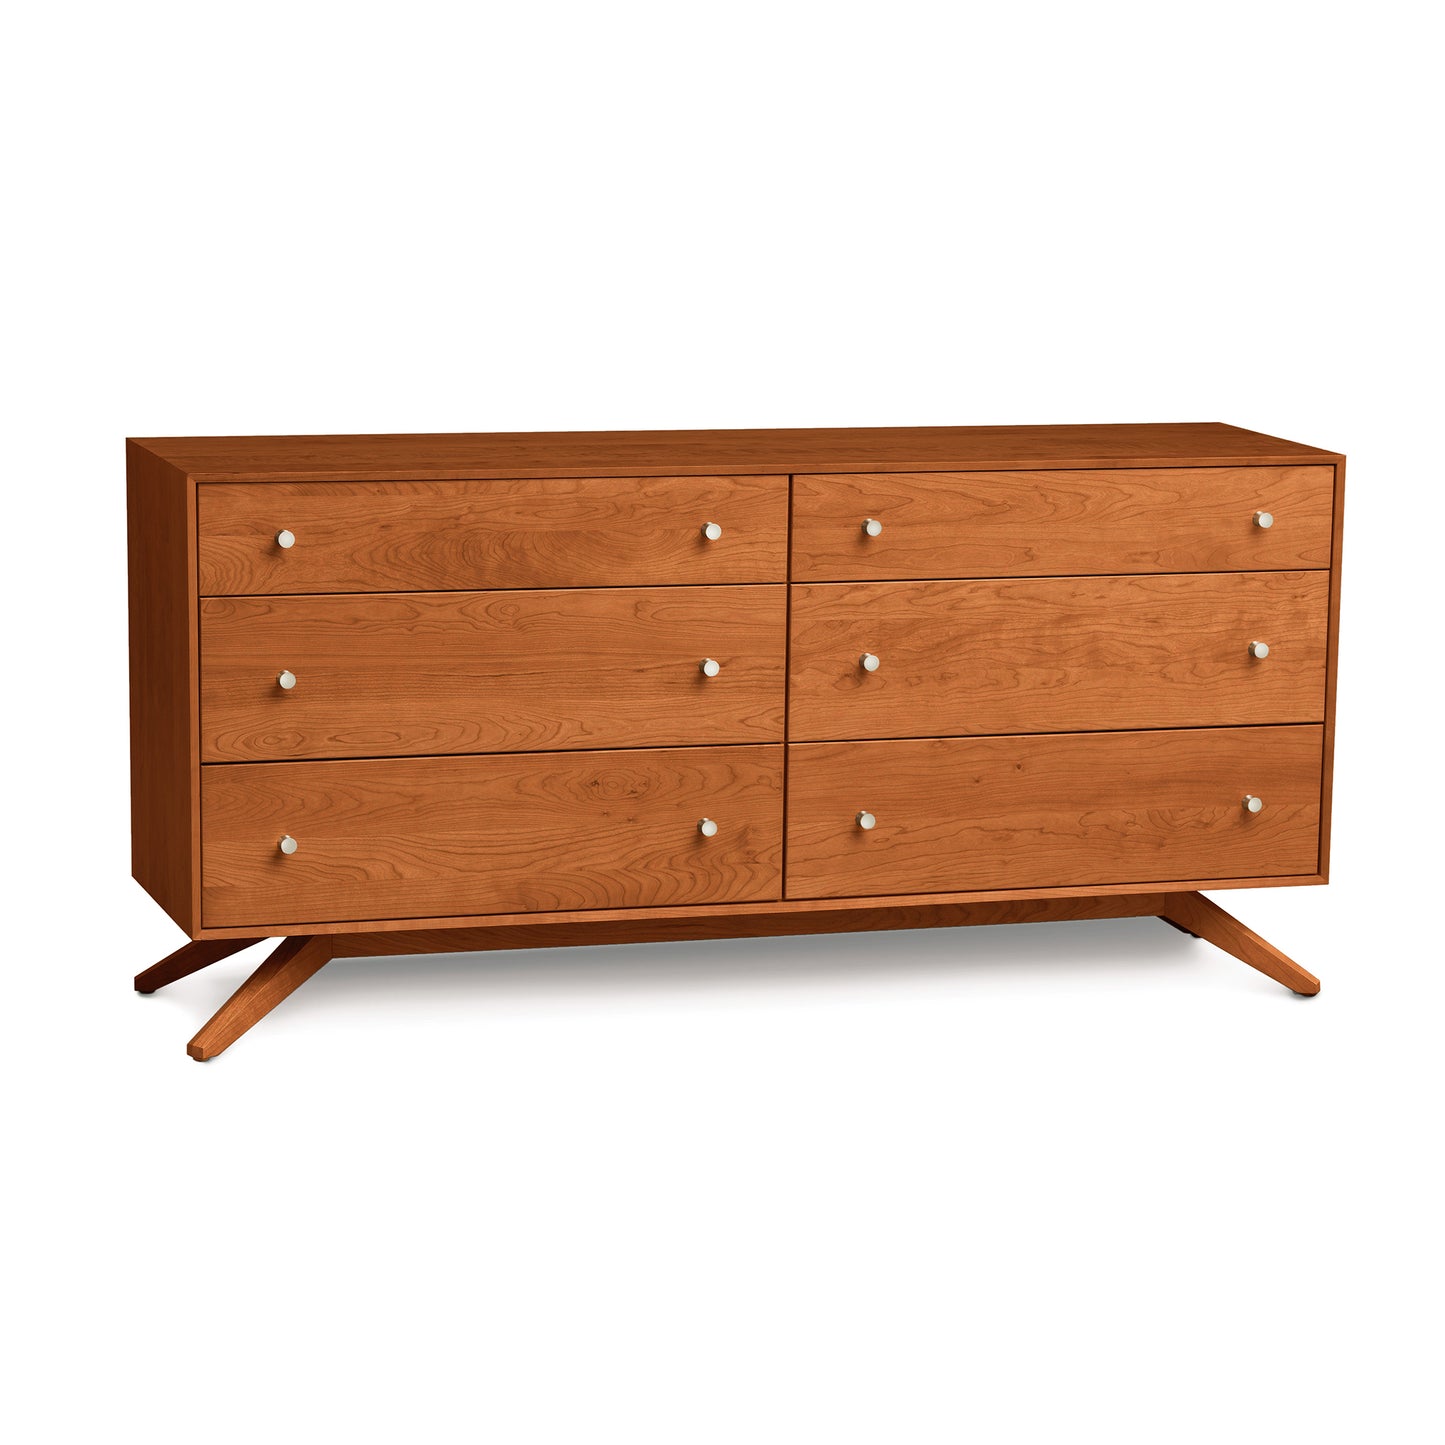 A Copeland Furniture Astrid 6-Drawer Dresser with six drawers, angled legs, and round knobs on a white background.